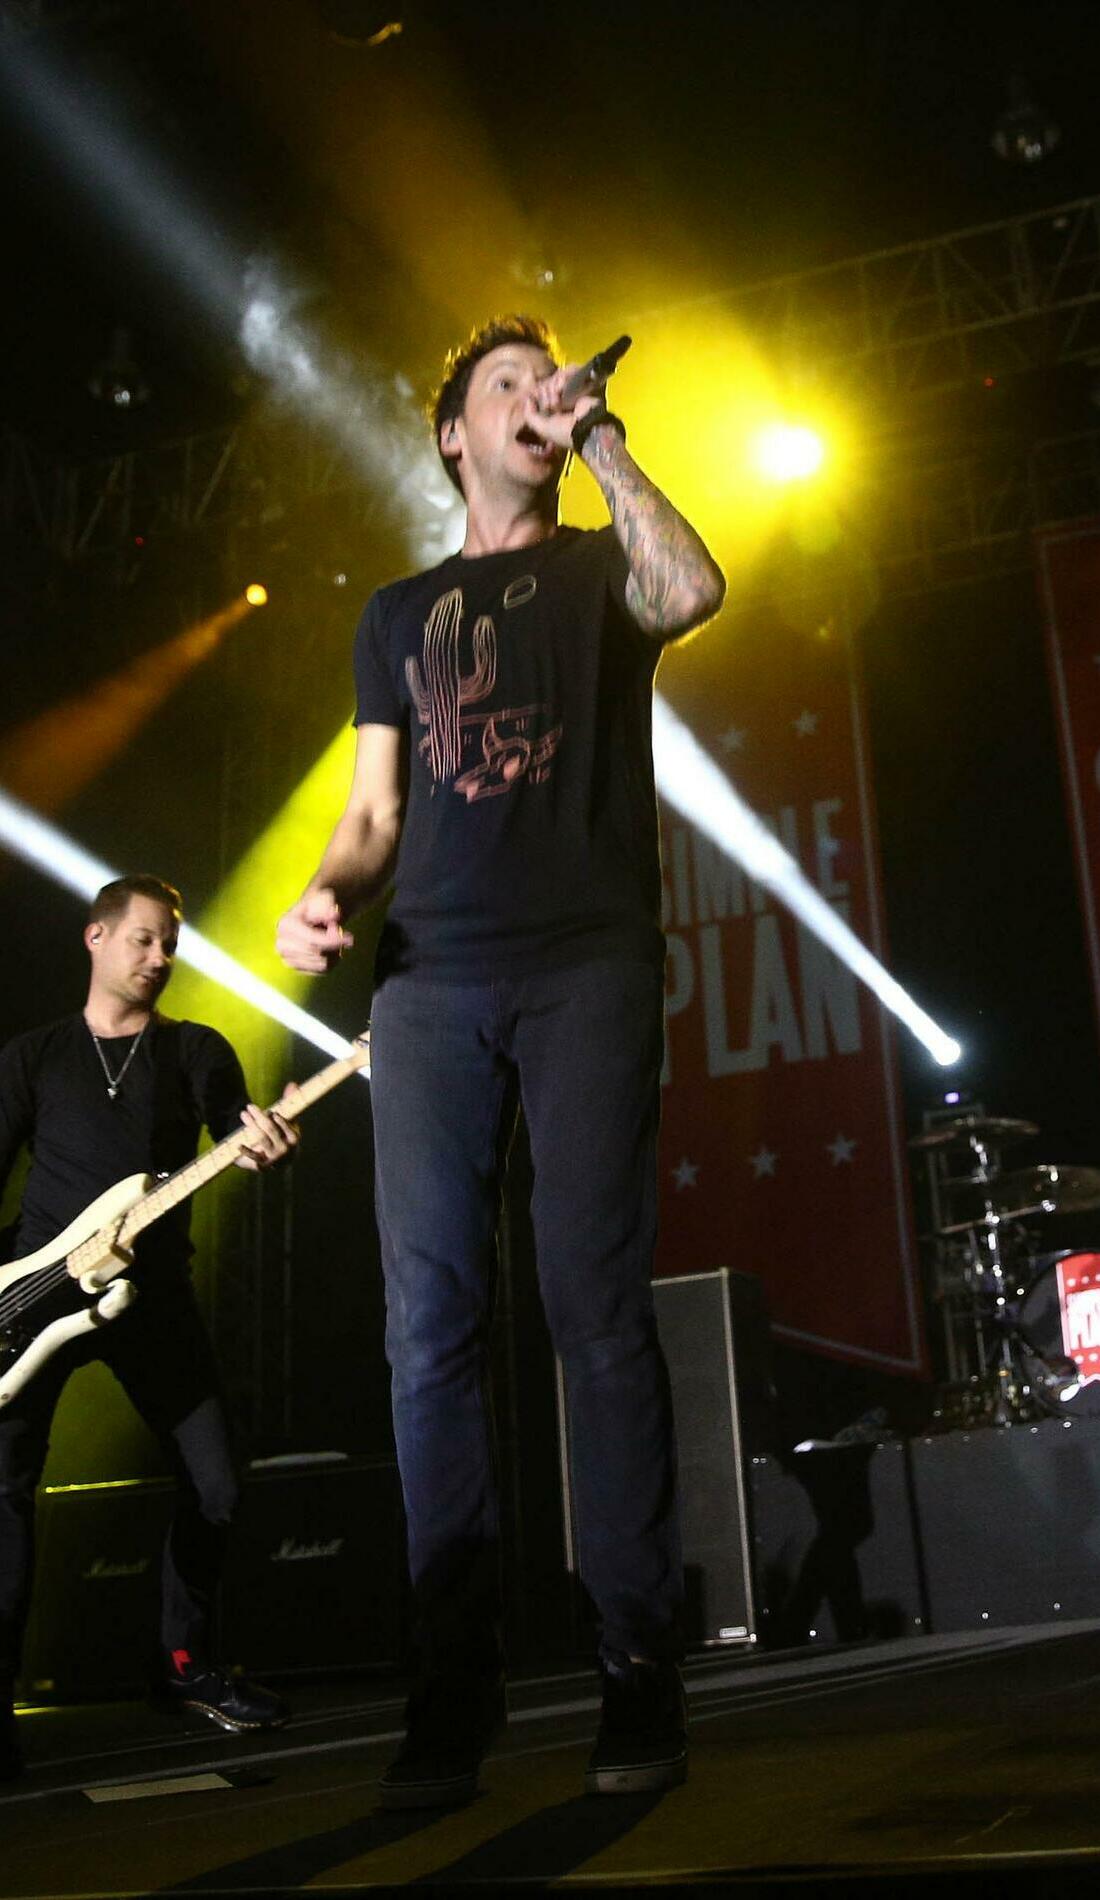 A Simple Plan live event